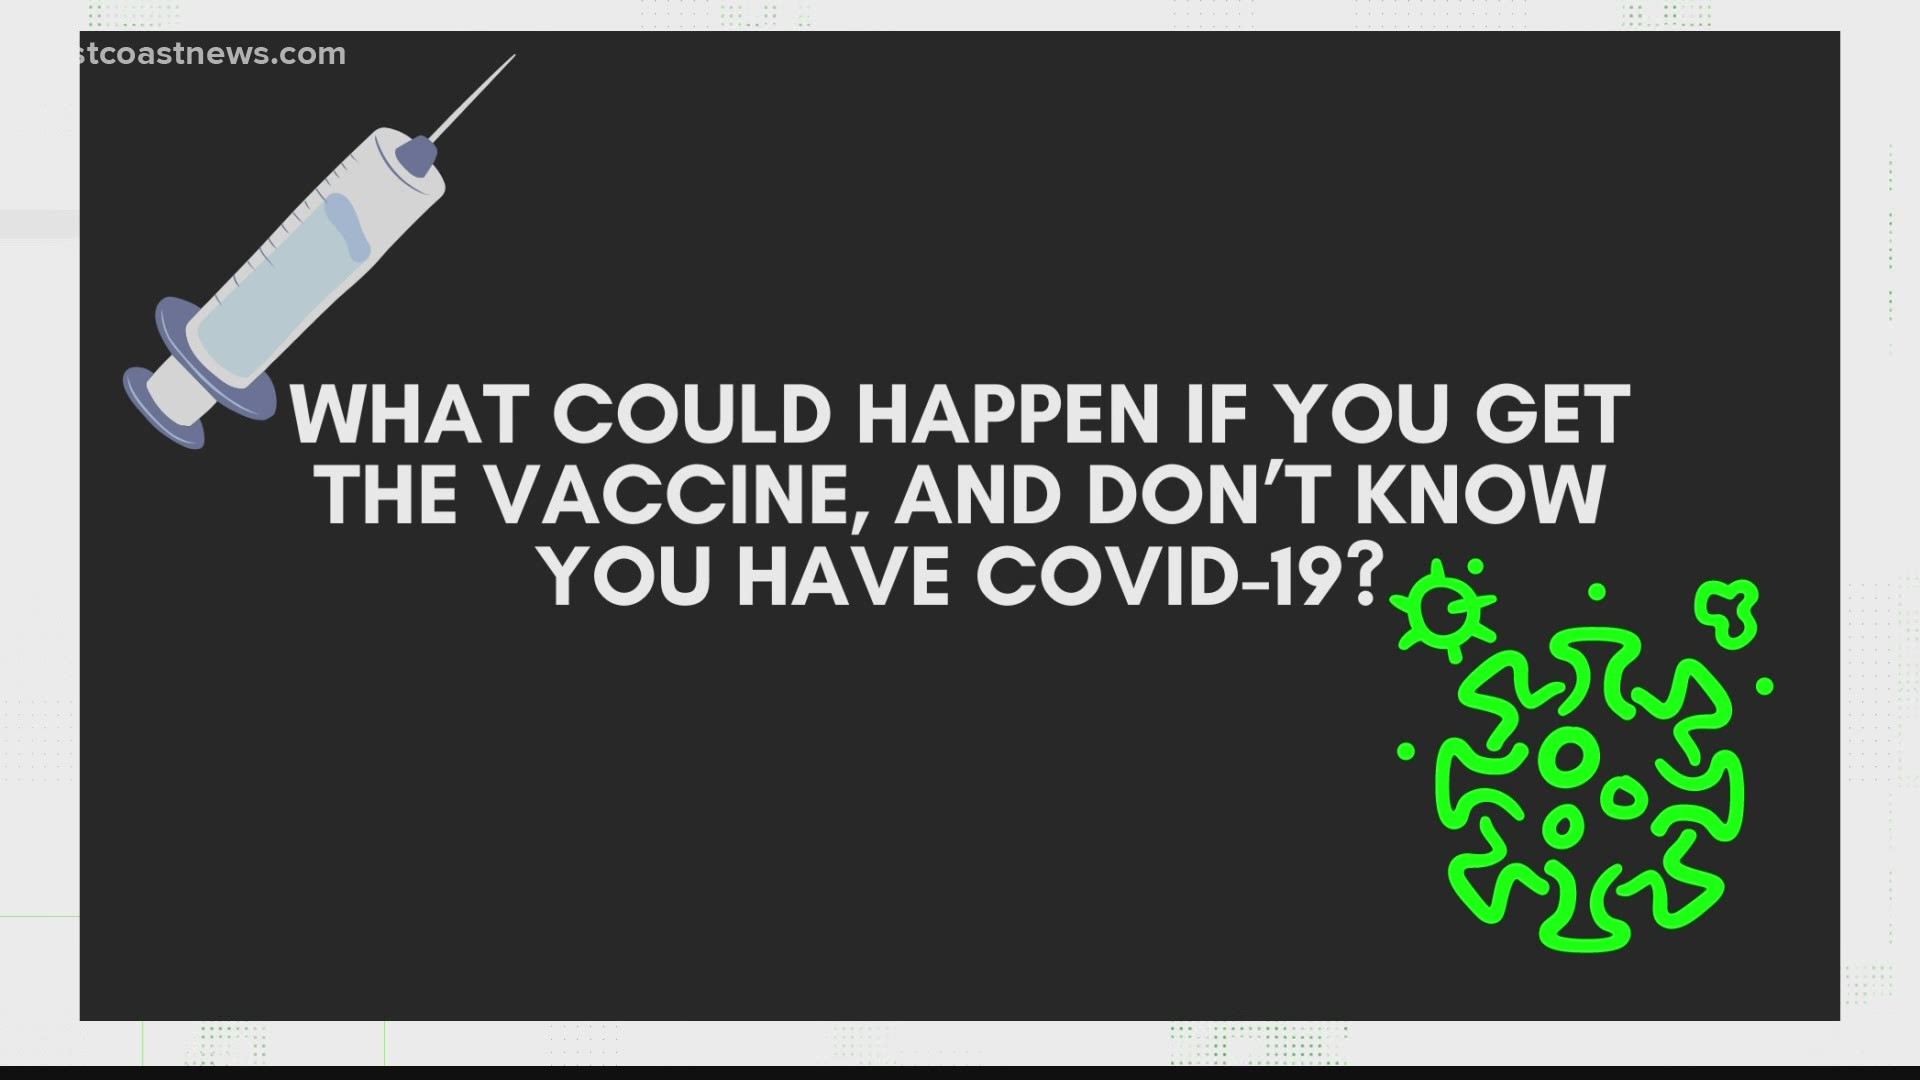 The majority of Floridians are eligible to receive the COVID-19 vaccine, while thousands are still testing positive for the virus.